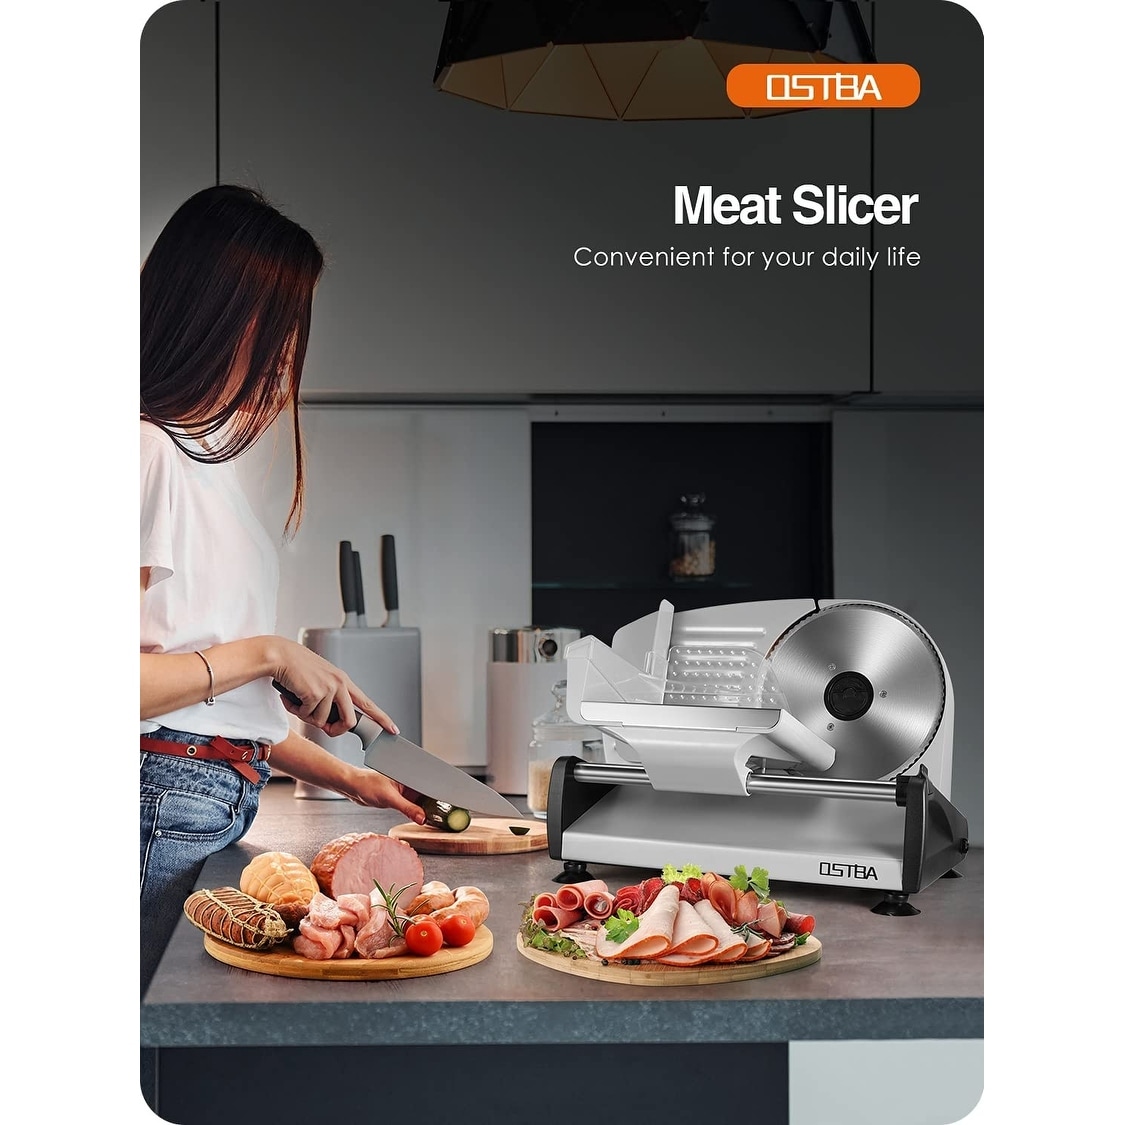 https://ak1.ostkcdn.com/images/products/is/images/direct/be87878e05f1bbe75a7138efe2953b2d84993c0a/OSTBA-Electric-Meat-Slicer-with-Child-Lock-Protection-%28150W%29.jpg